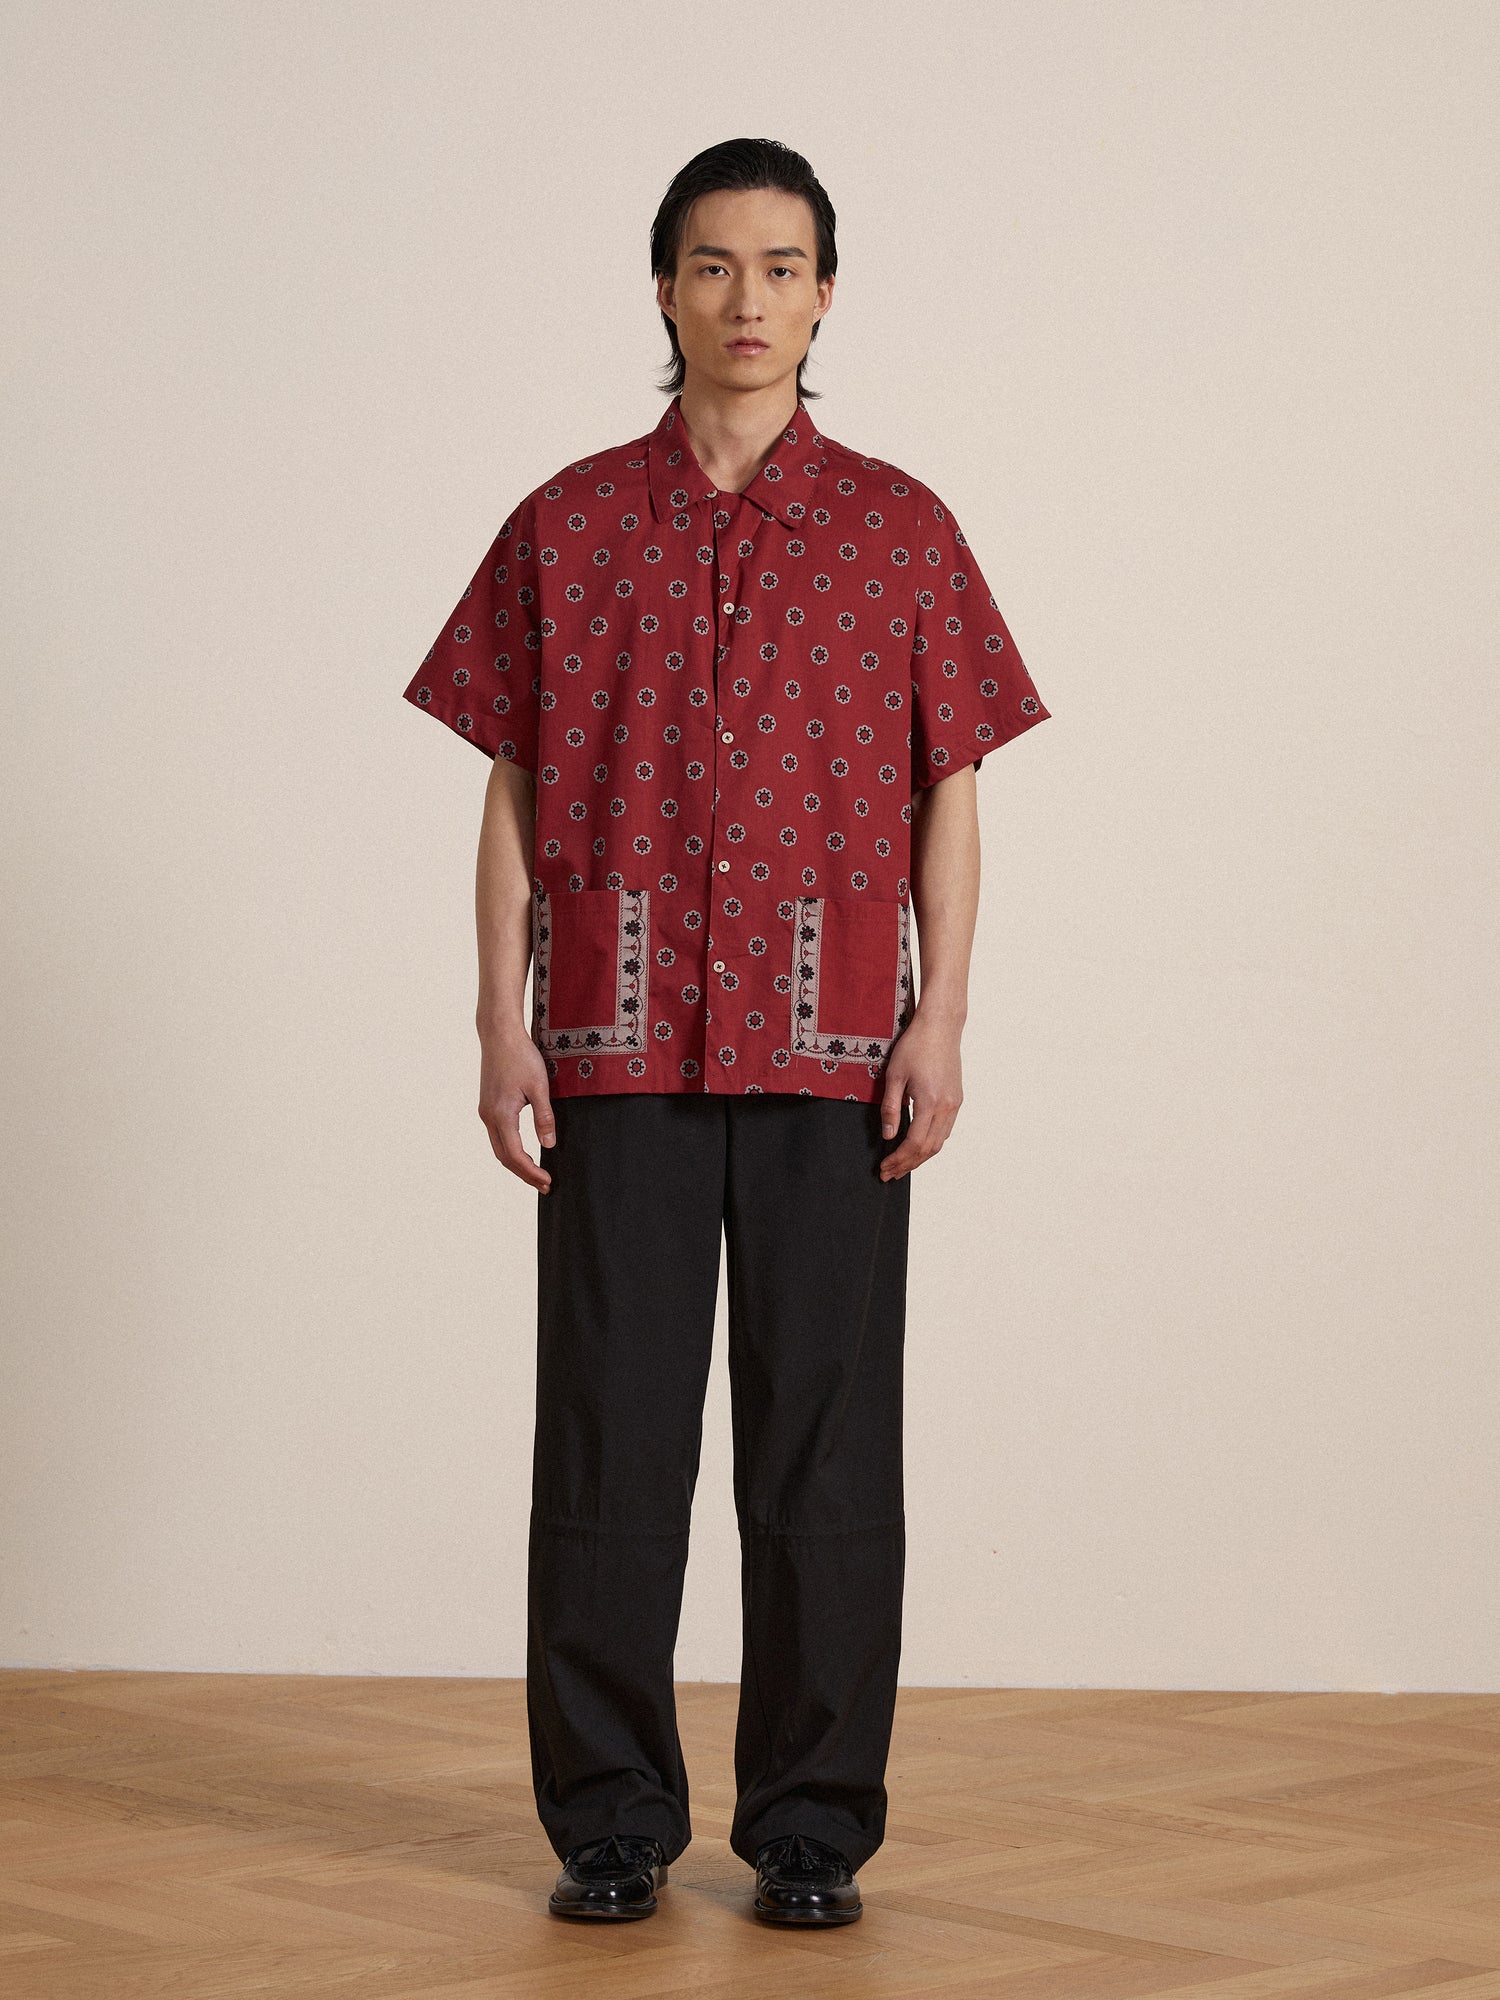 A man wearing a Found Red Motif SS Camp Shirt and black pants.